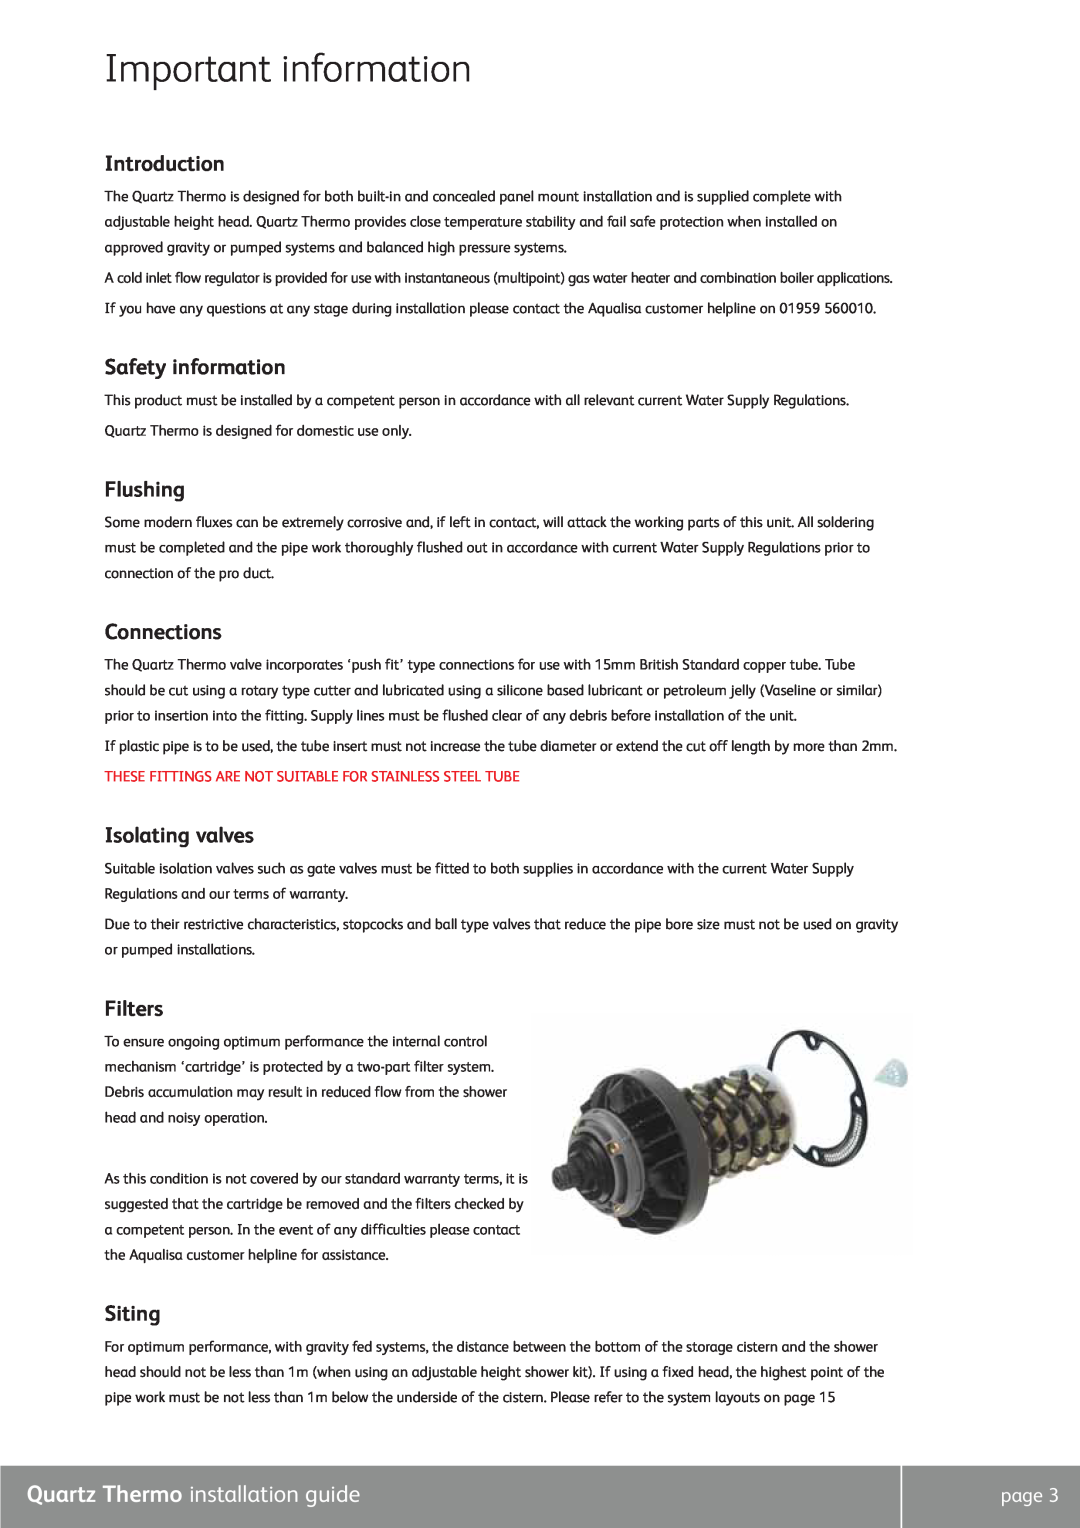 Quartz QZ3111 Important information, Introduction, Safety information, Flushing, Connections, Isolating valves, Filters 